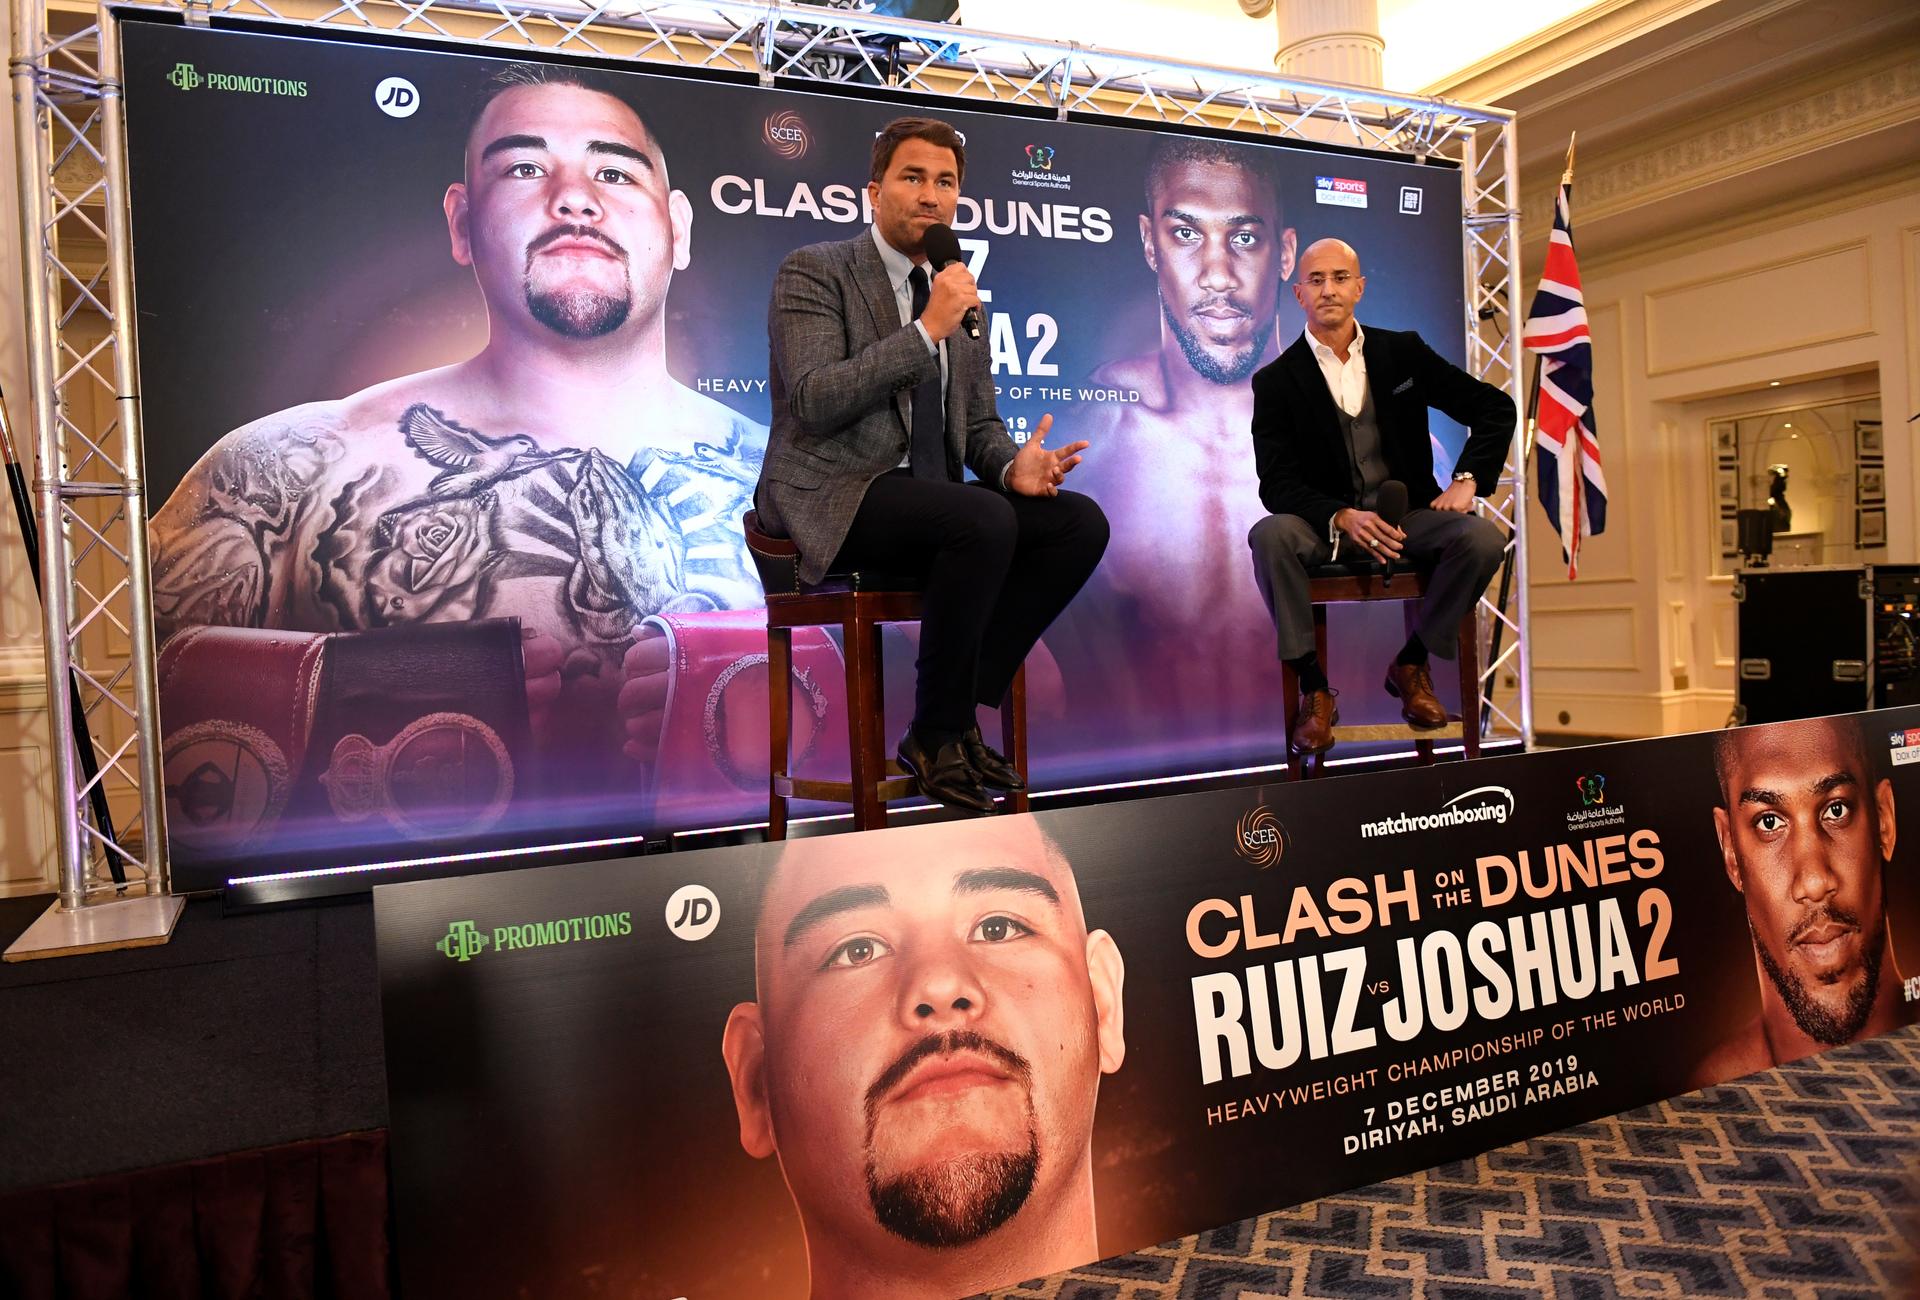 Promoter Eddie Hearn announces Clash on the Dunes, a boxing rematch in Saudi Arabia between heavyweights Andy Ruiz, Jr and Anthony Joshua.